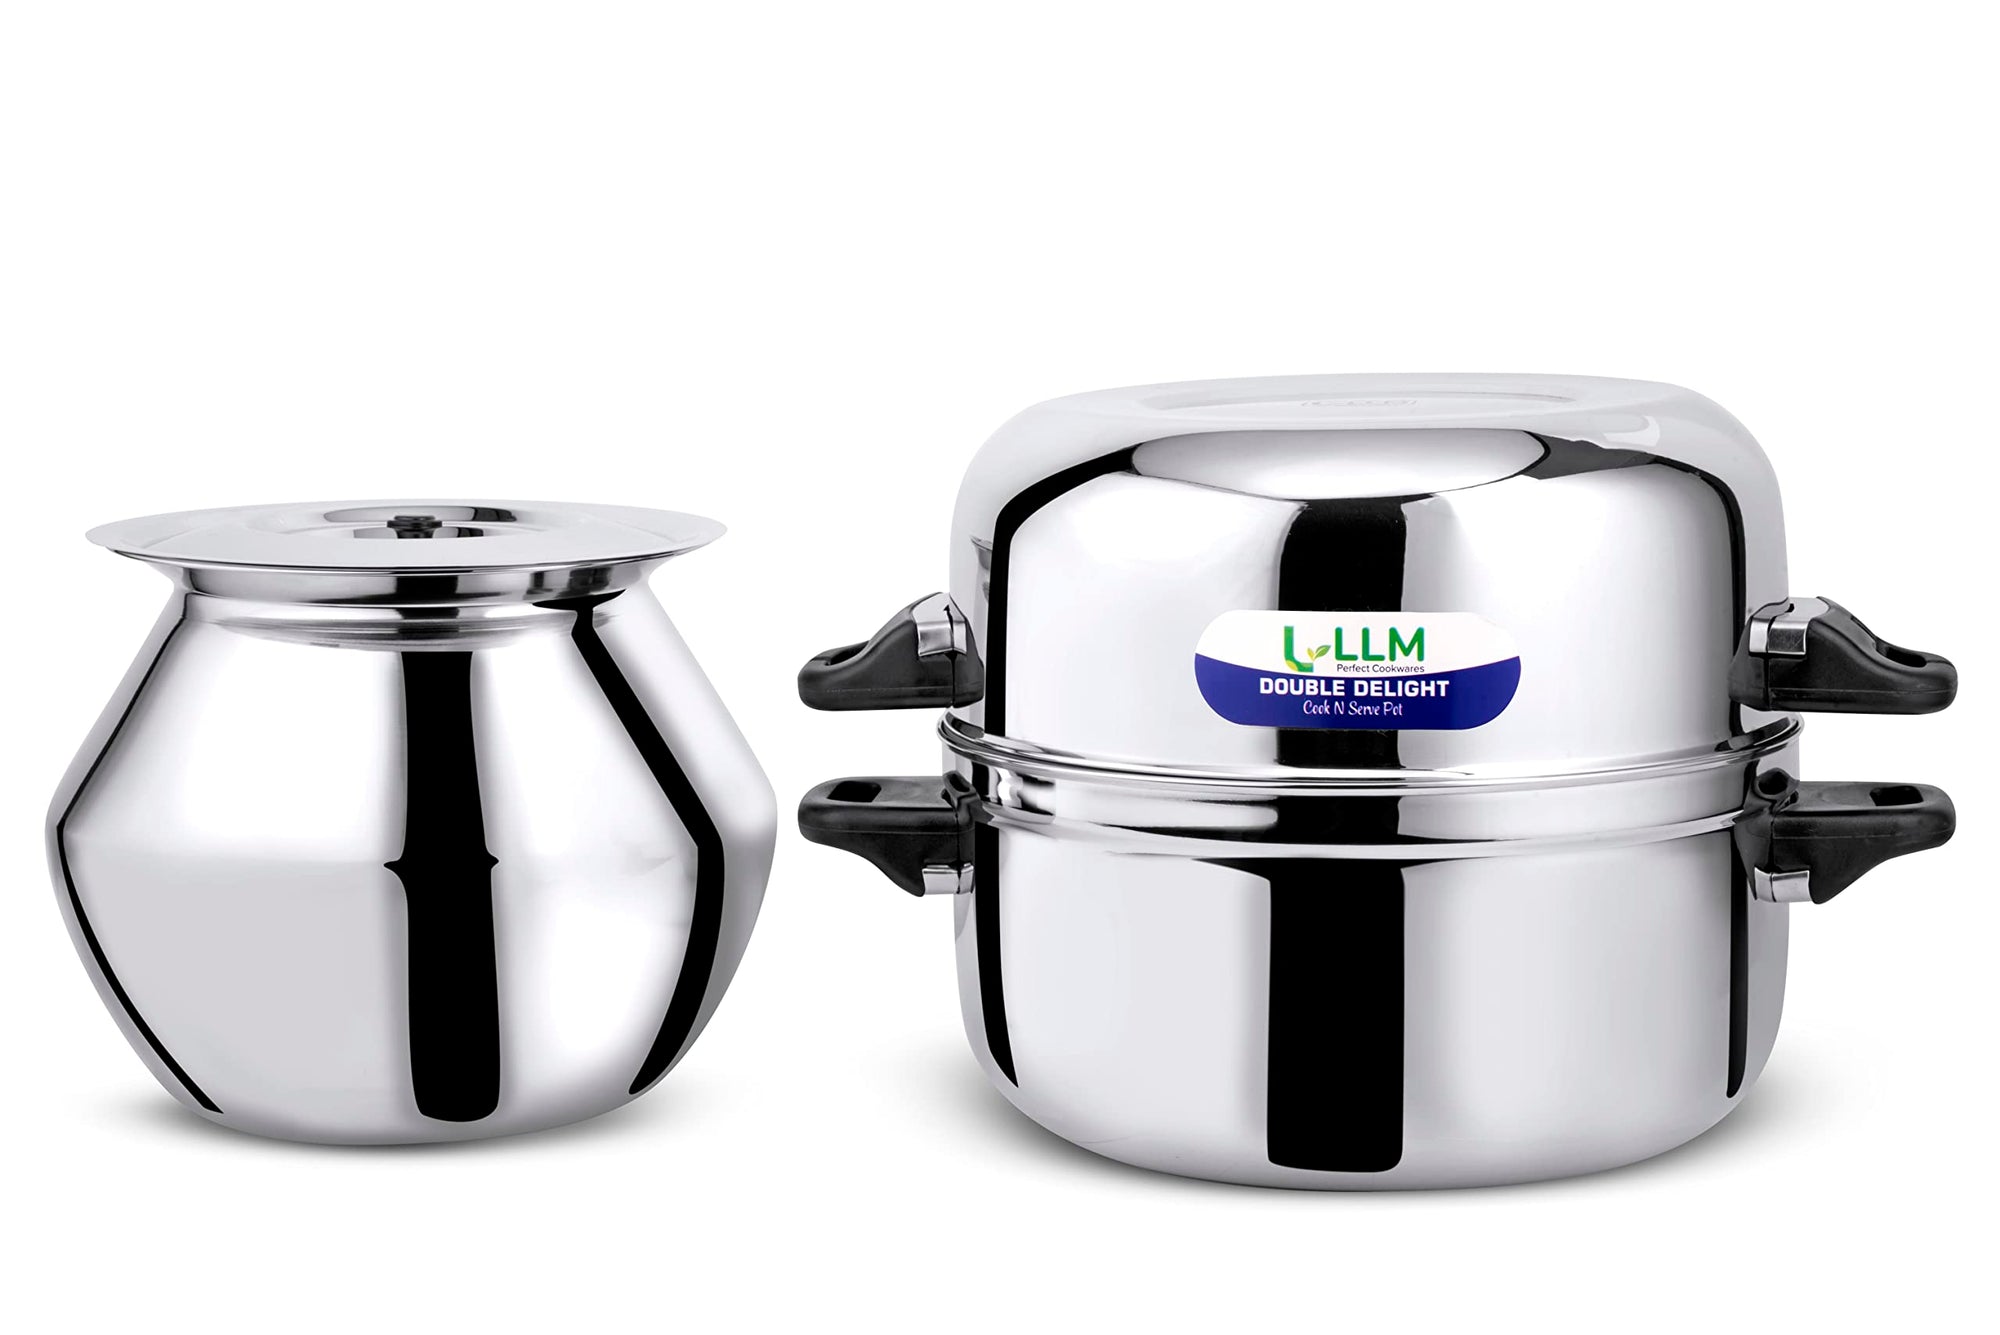 LLM thermal rice cooker